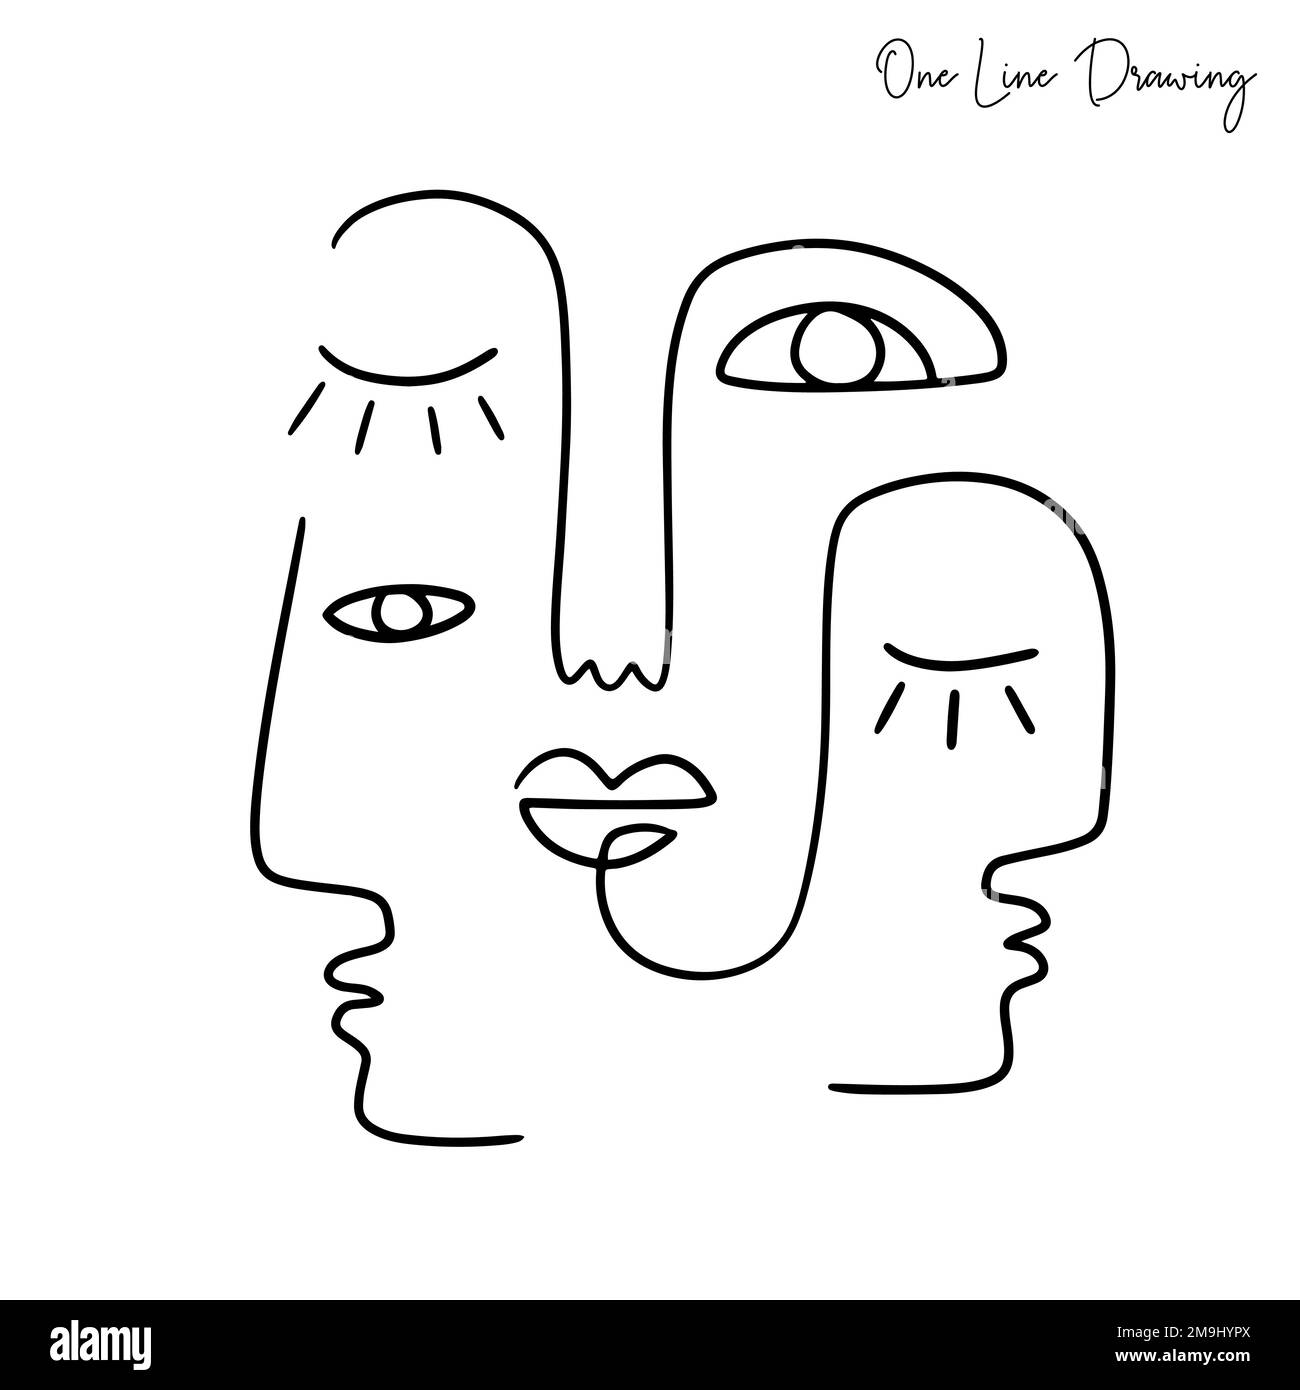 One line drawing people faces. Linear abstract couple Stock Vector ...